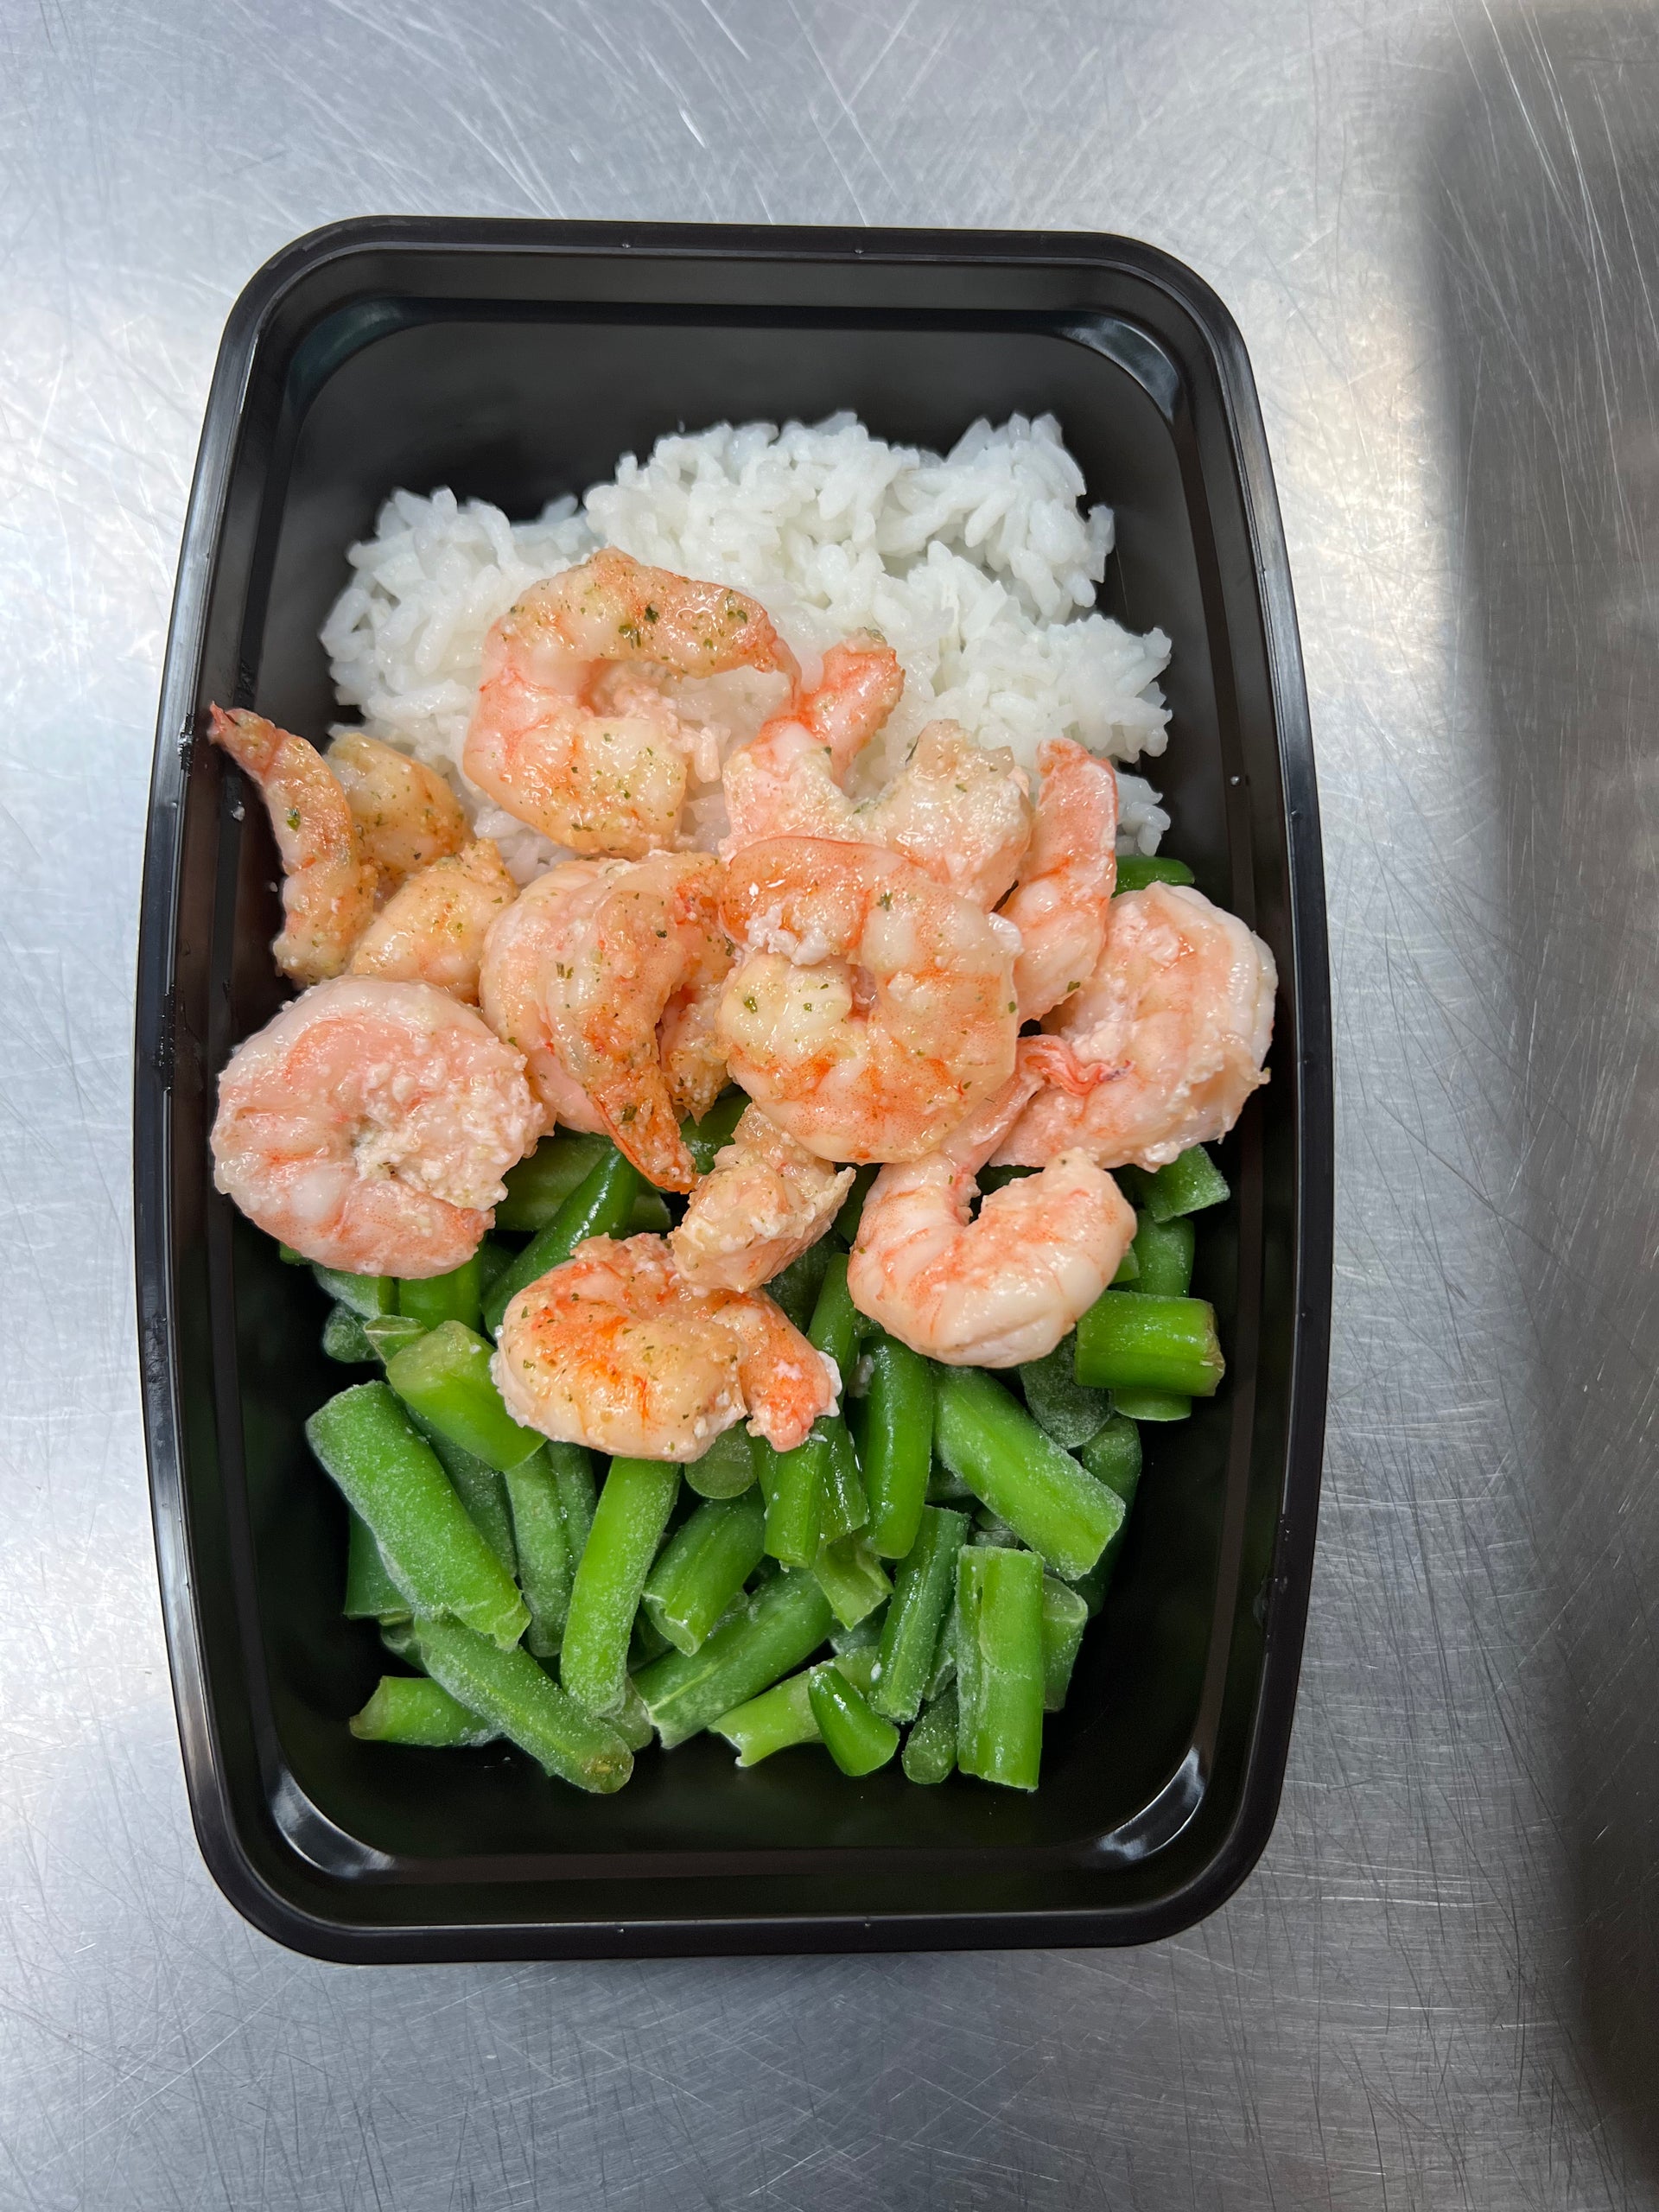 Create Your Own Meal: Shrimp